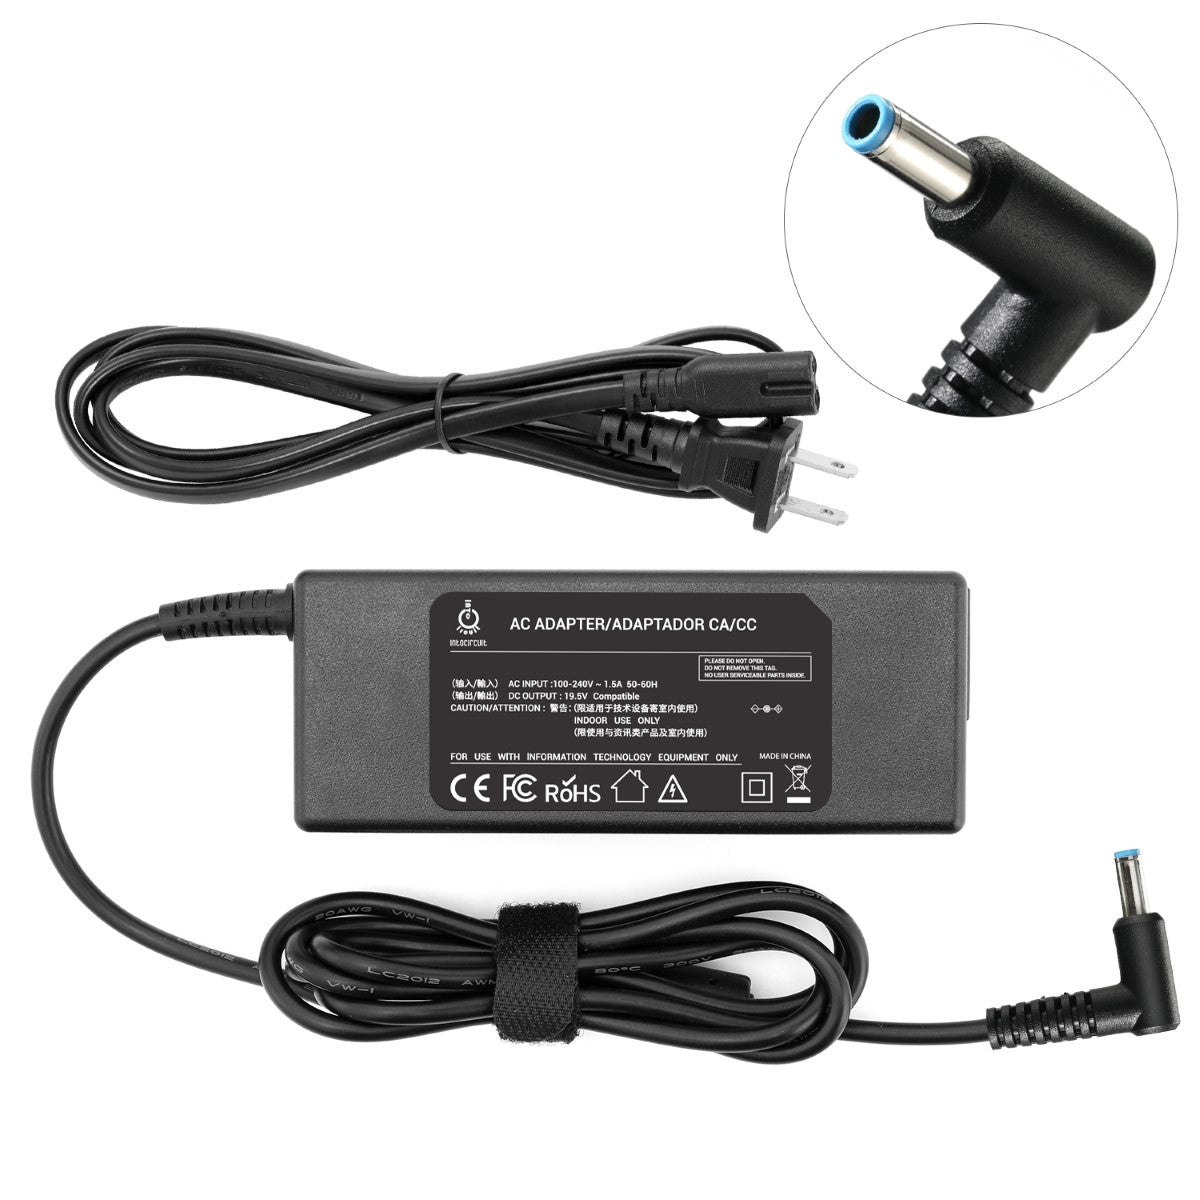 Charger for HP 255 G2 F7V51UT Notebook